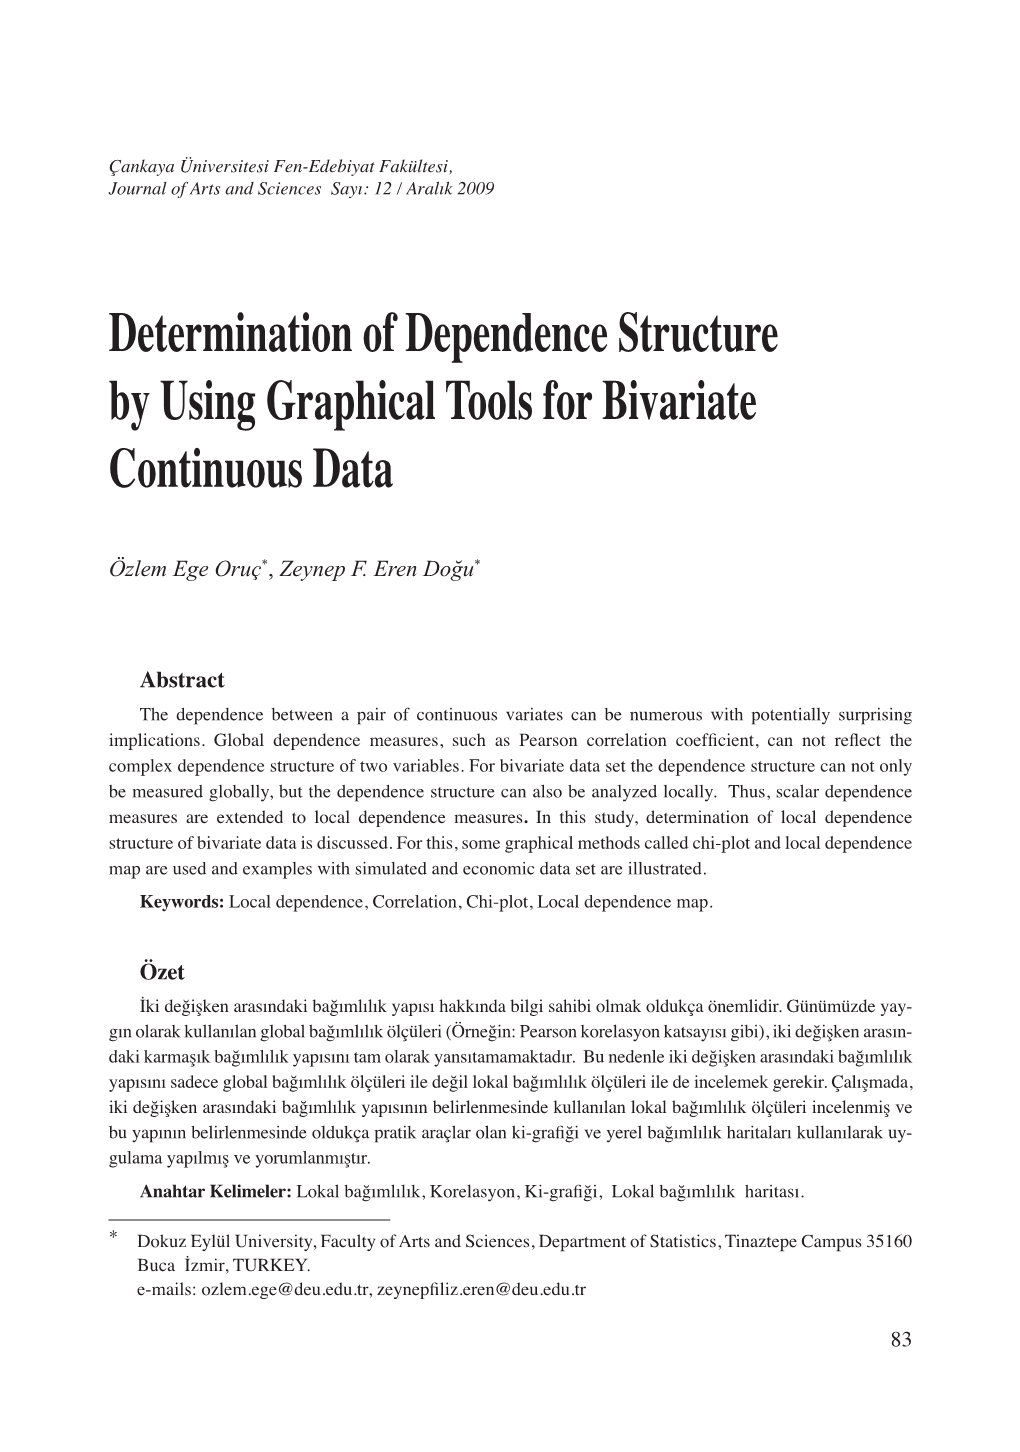 Determination of Dependence Structure by Using Graphical Tools for Bivariate Continuous Data